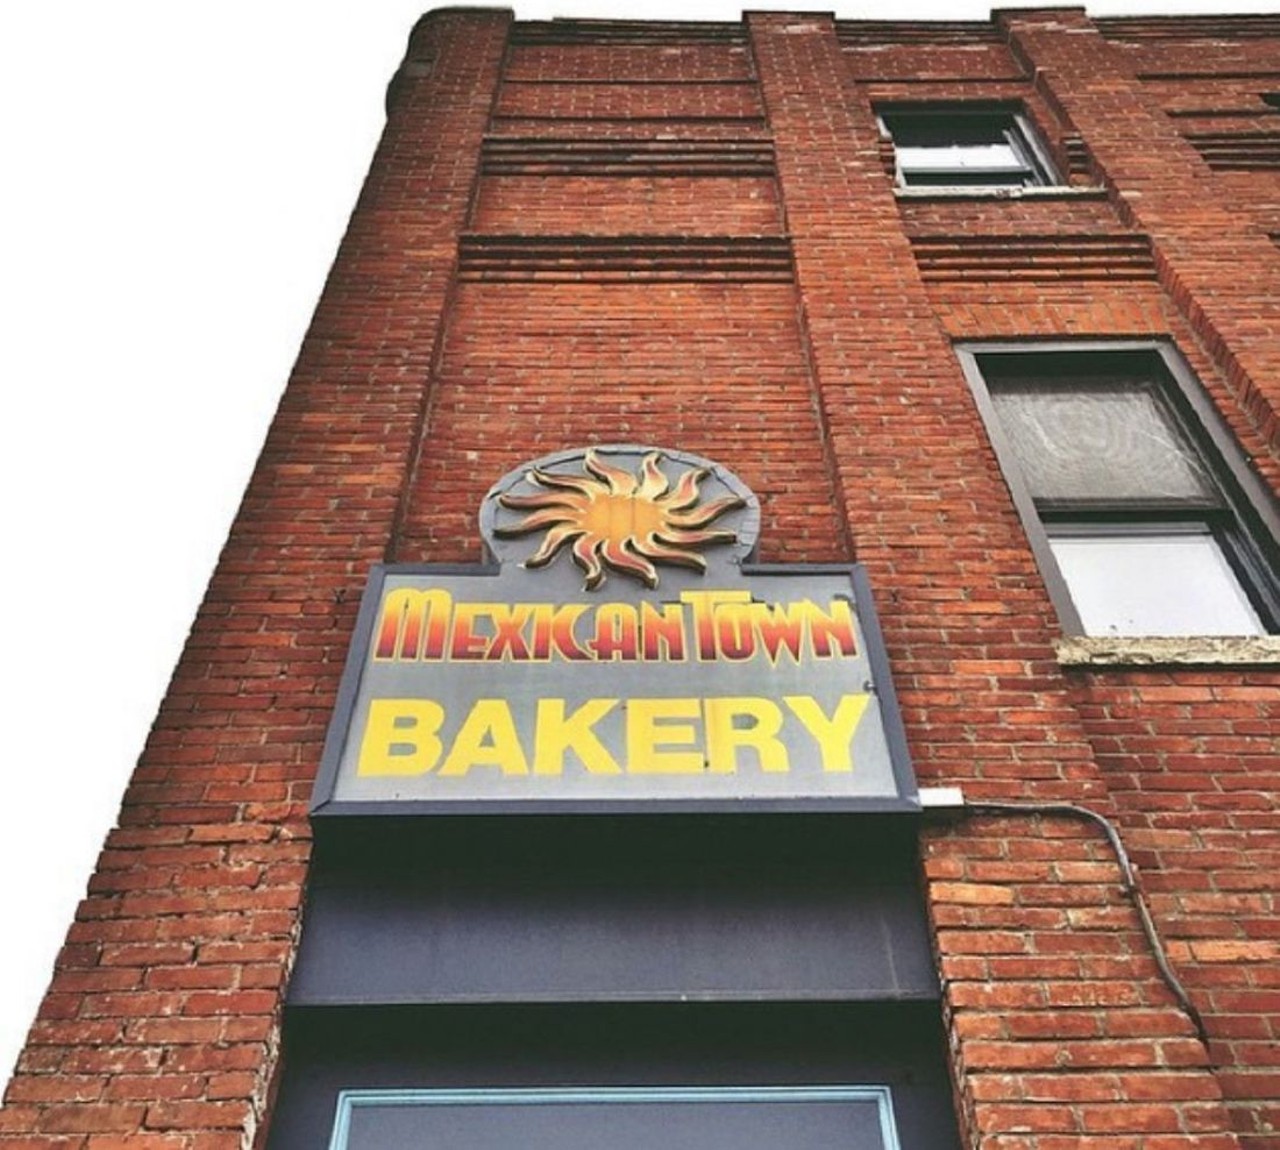 Mexicantown Bakery
4300 Vernor Hwy., Detroit; 313-554-0001
Visit the Mexicantown Bakery in Detroit for an authentic and unique taste. Choices of pastries and desserts include cream cheese and guava danishes, conchas, and a favorite &#151; tres leches cake. This bakery is hard to resist.
Photo via Instagram user @mexicantownbakery